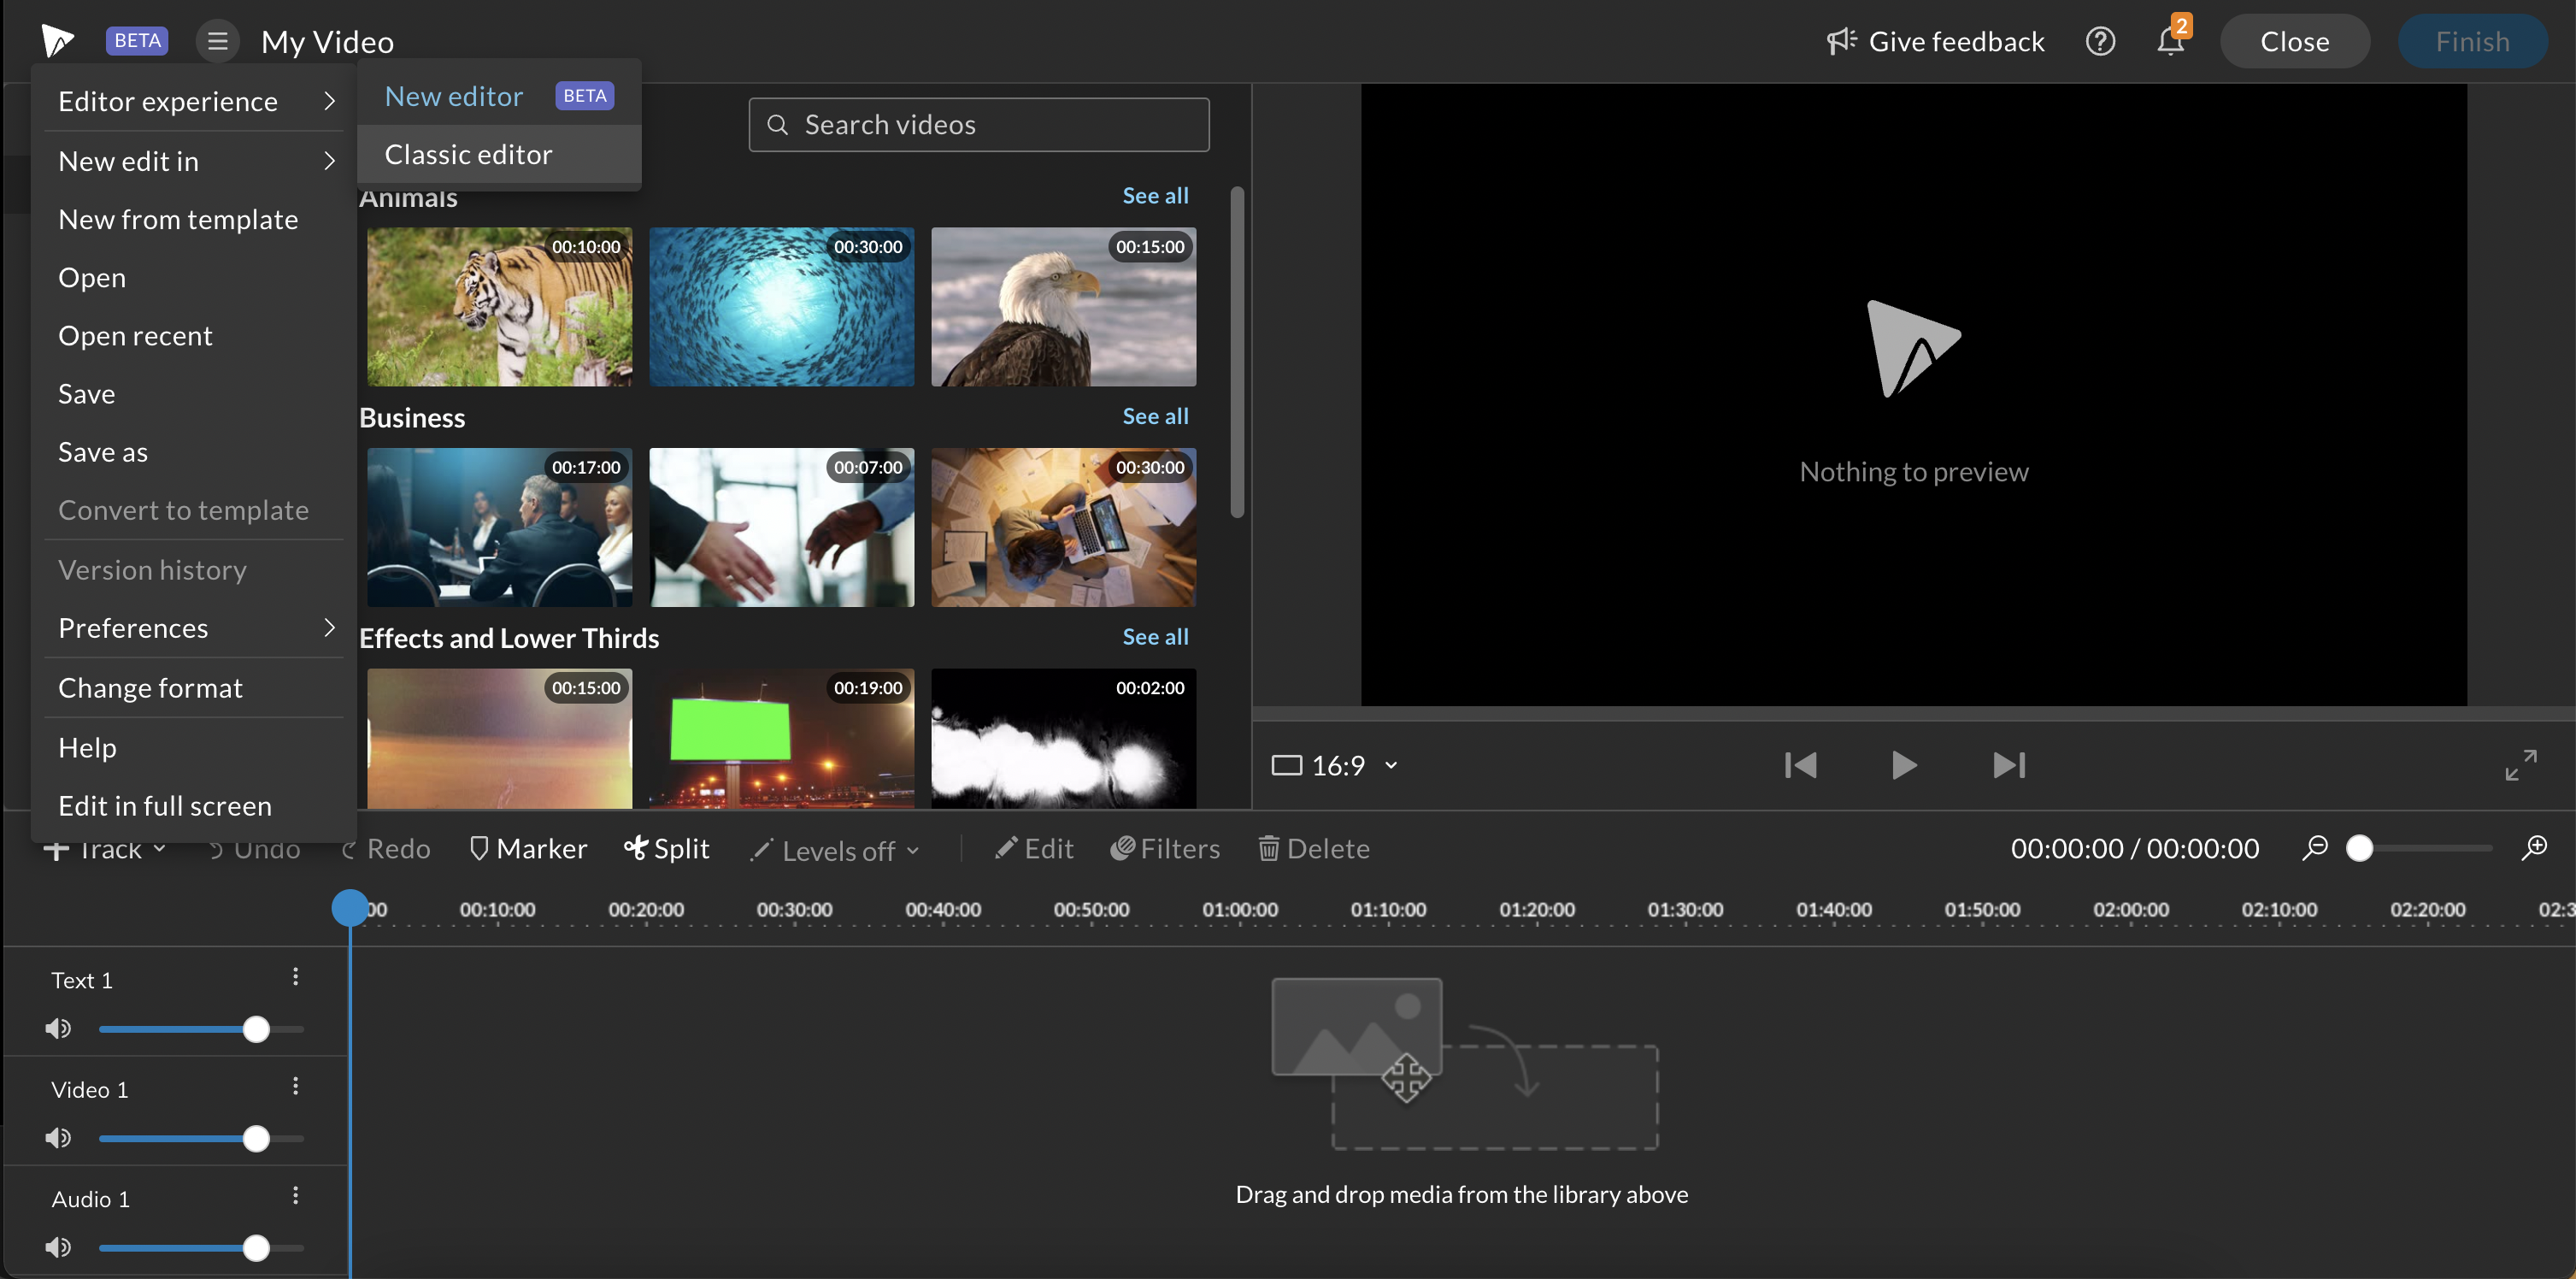 New WeVideo editor, showing how to switch back to the Classic WeVideo editor.